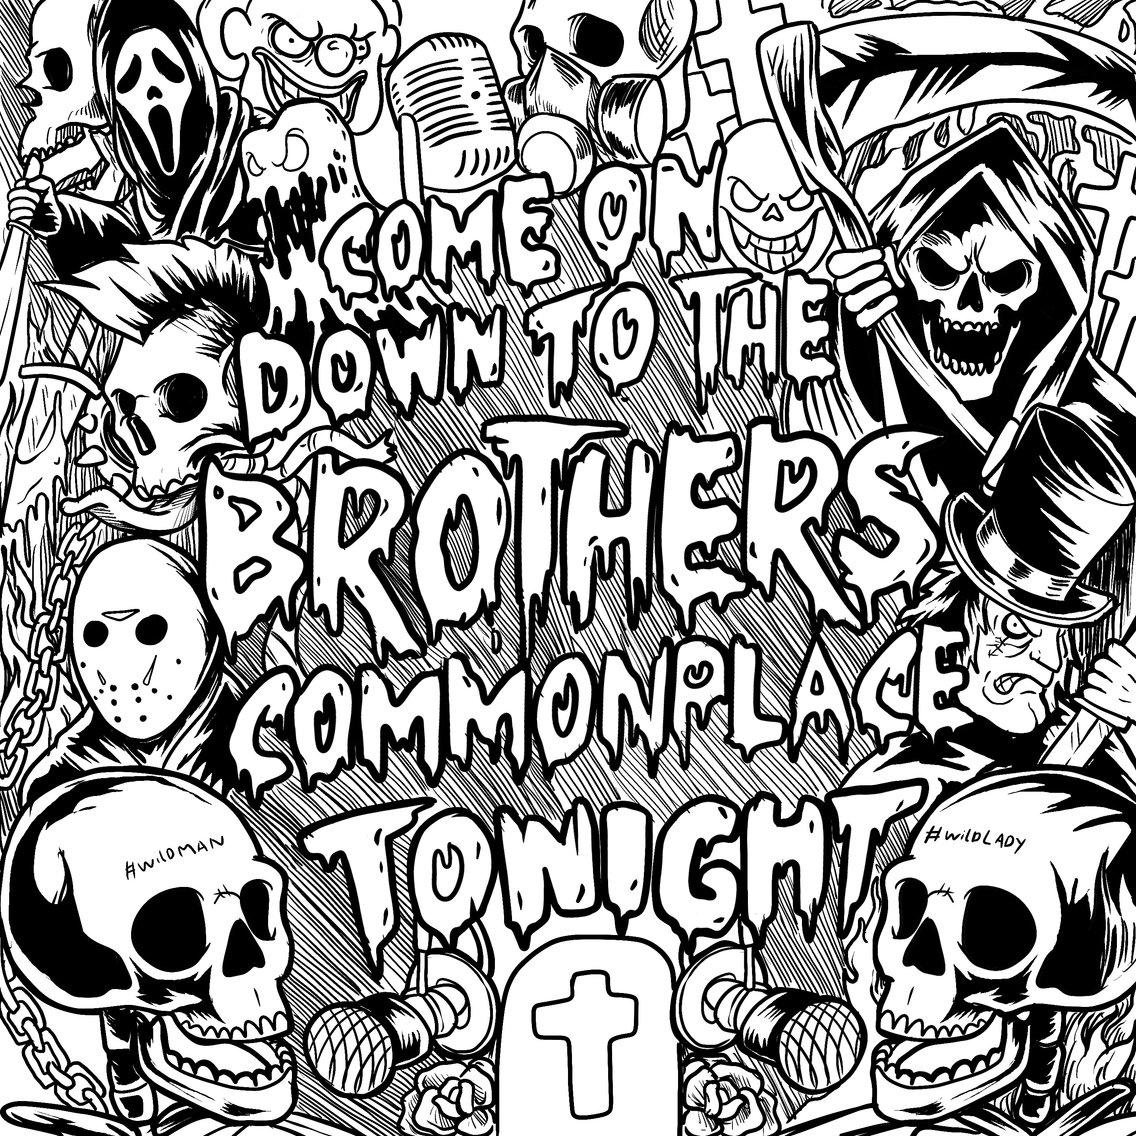 The Brothers Commonplace - Cover Image